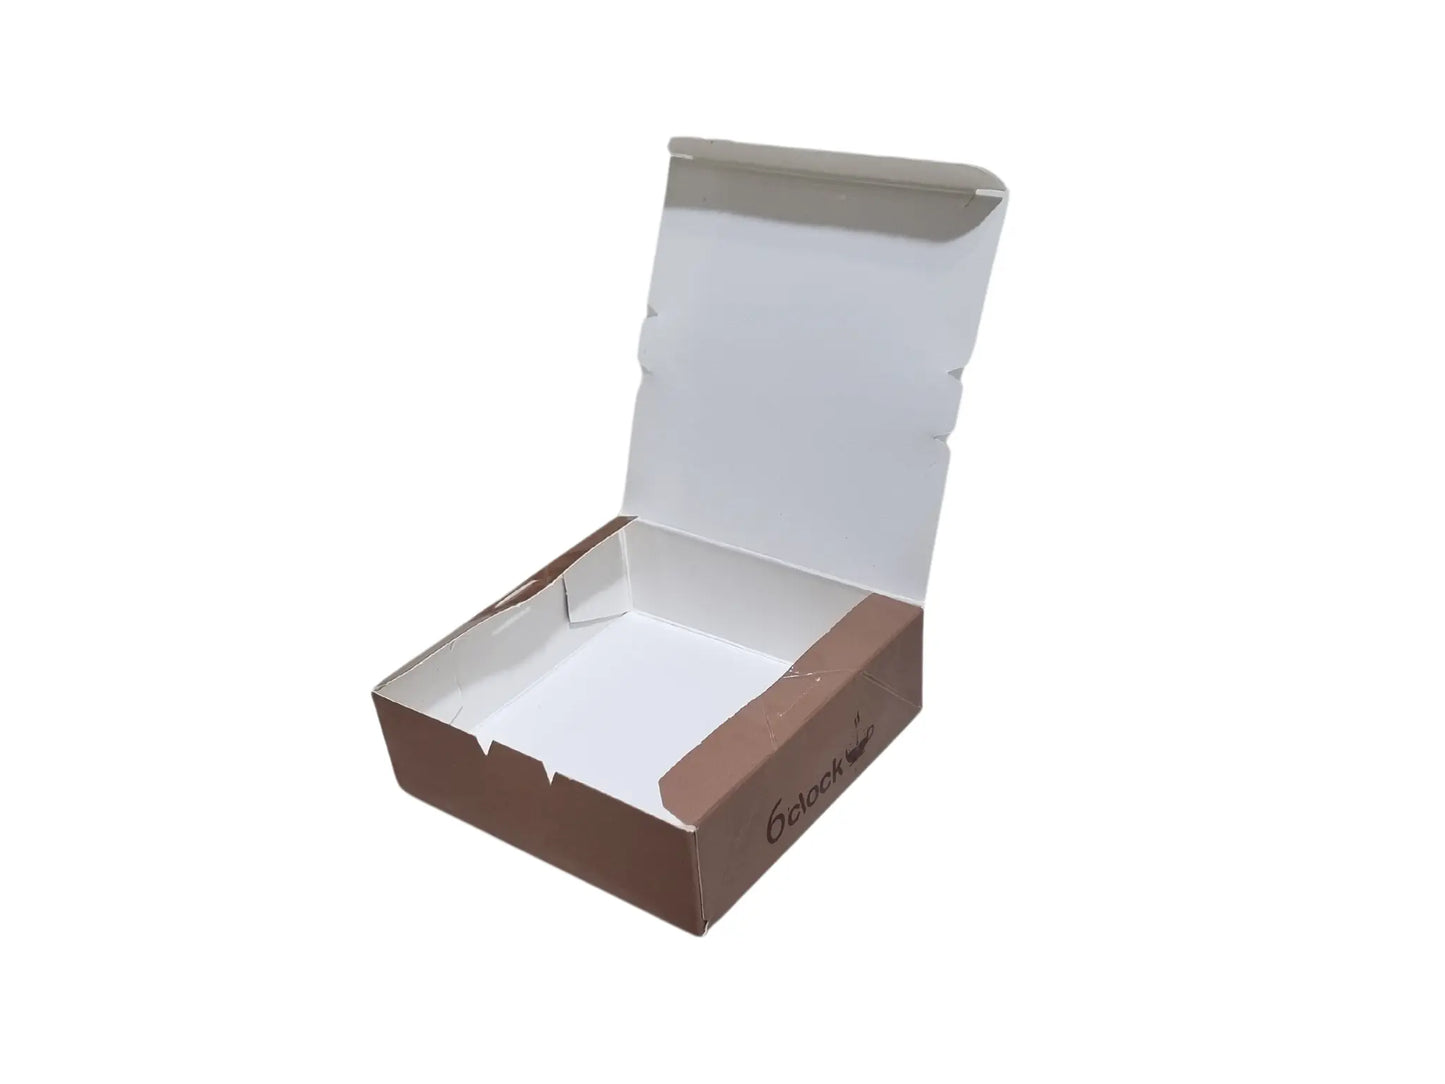 Sweets chocolate coffe box printed with customer logo 12×12×4 cm with out shiny lamination Sweets chocolate coffe box printed with customer logo 12×12×4 cm with out shiny lamination مطبعة مدار Madar Print